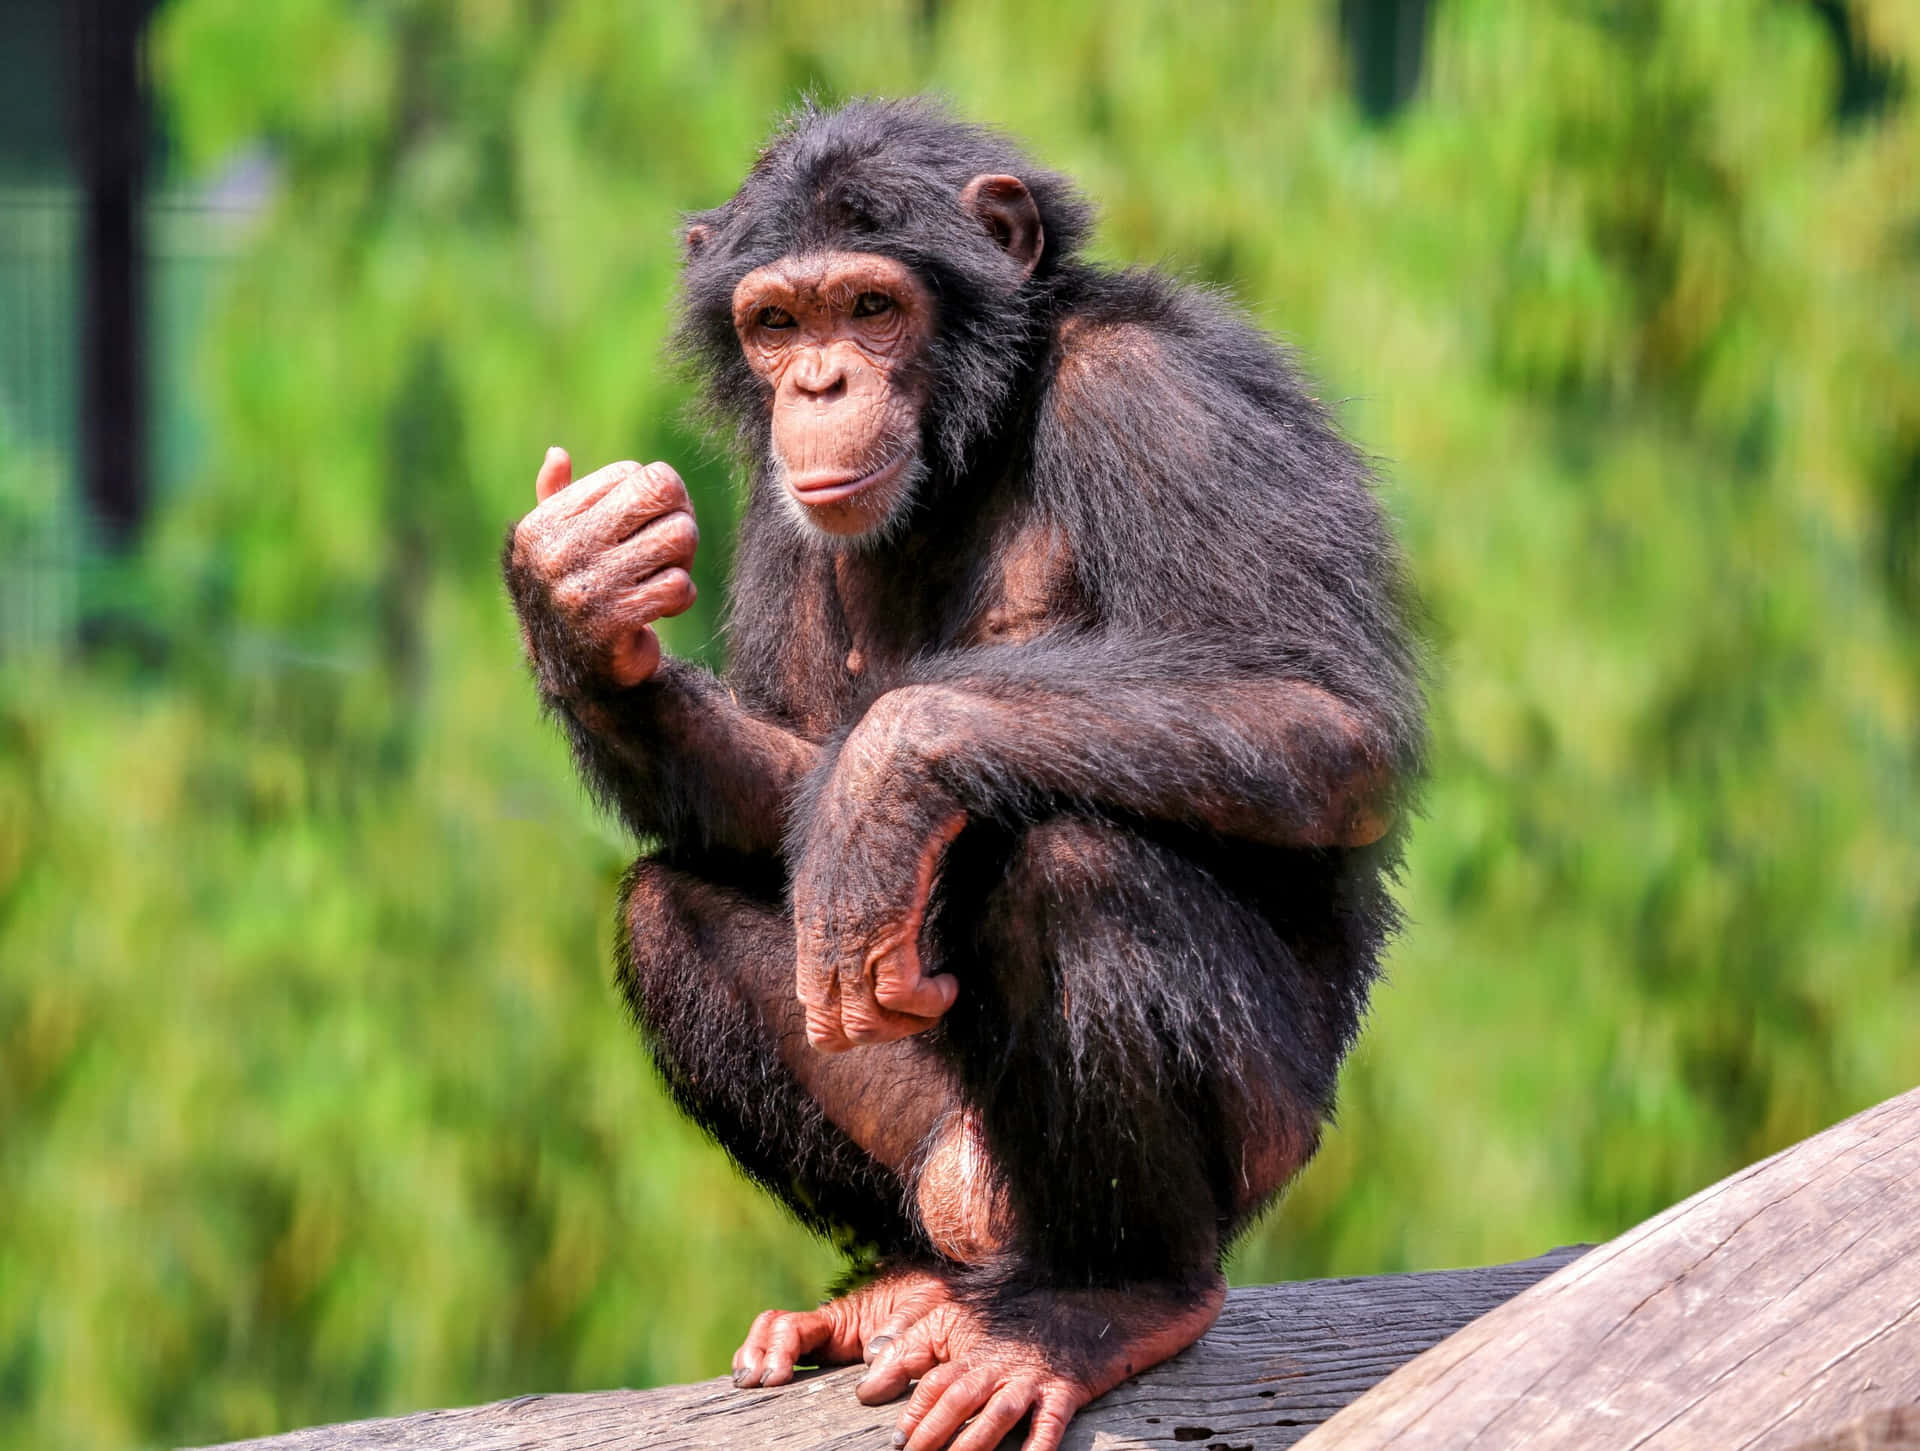 A mischievous chimpanzee at play